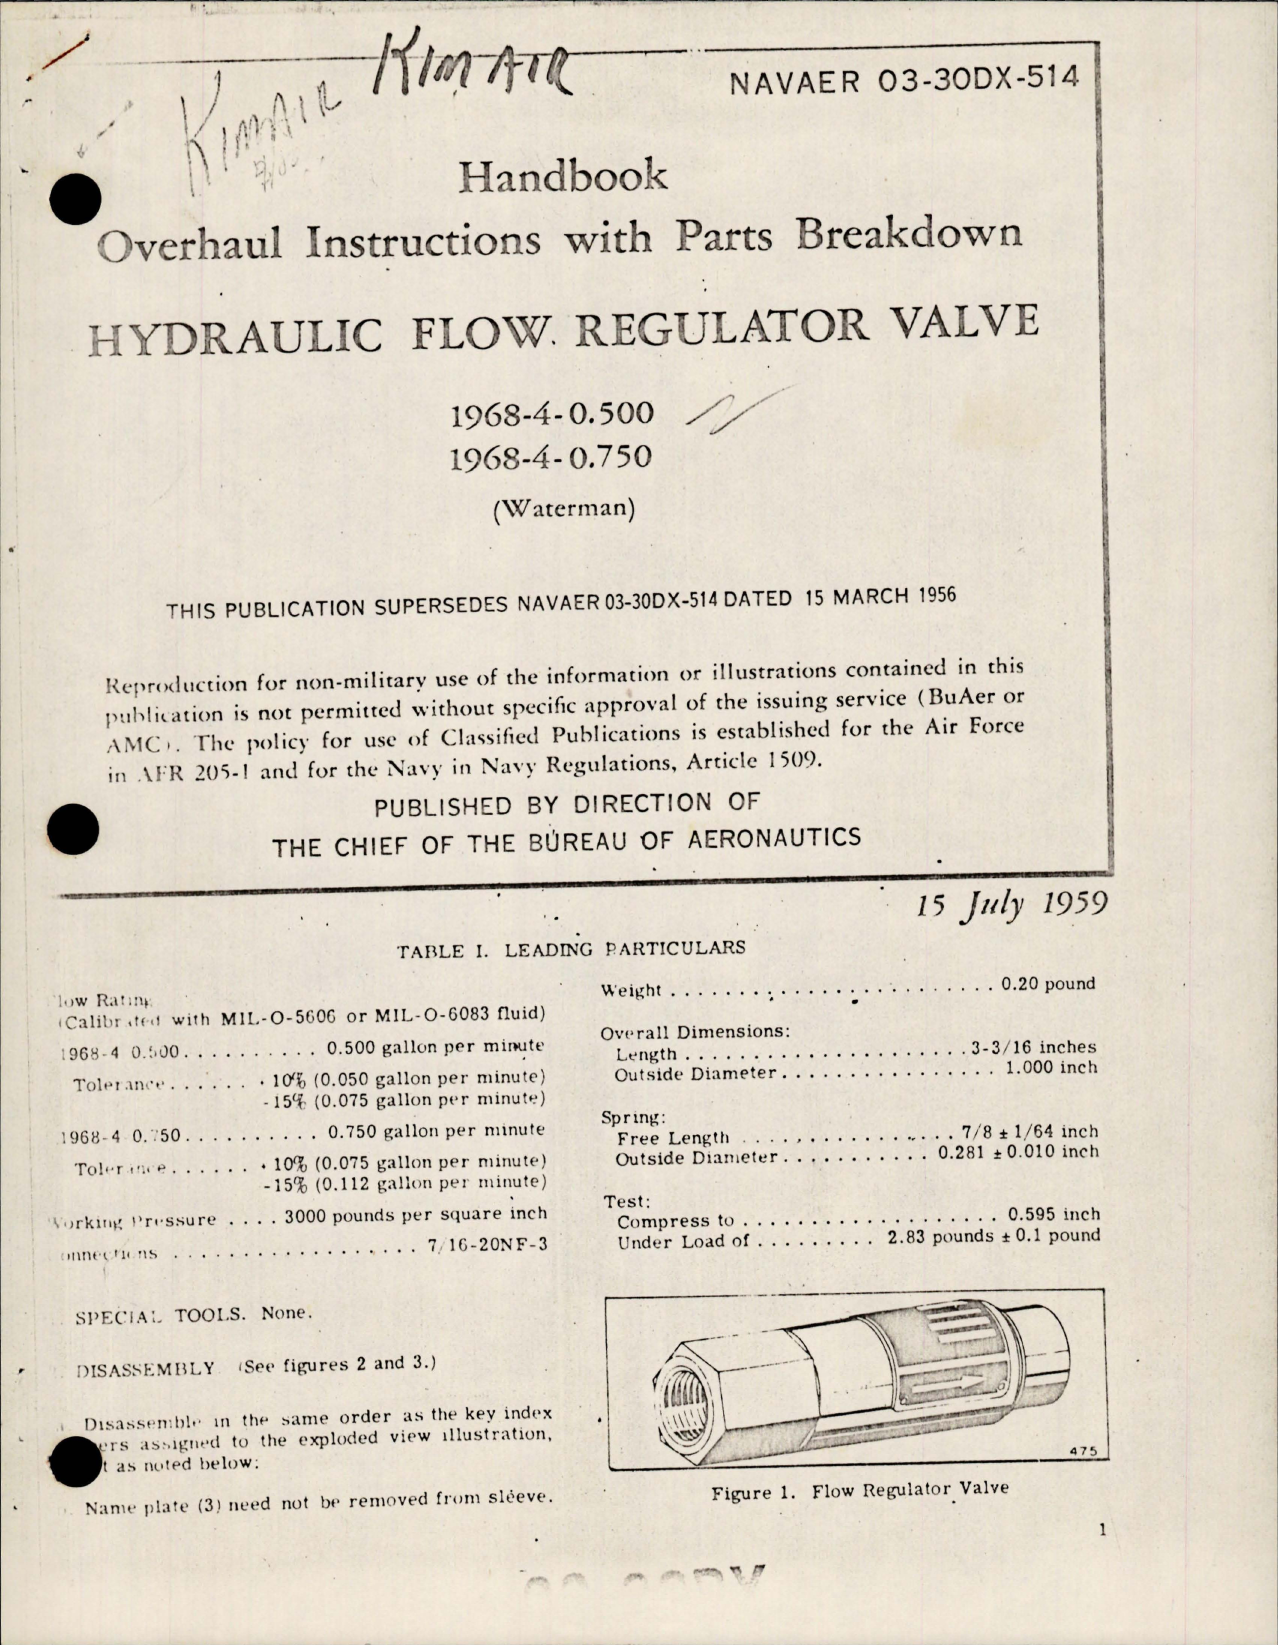 Sample page 1 from AirCorps Library document: Overhaul Instructions with Parts for Hydraulic Flow Regulator Valve - 1968-4-0.500 and 1968-4-0.750 